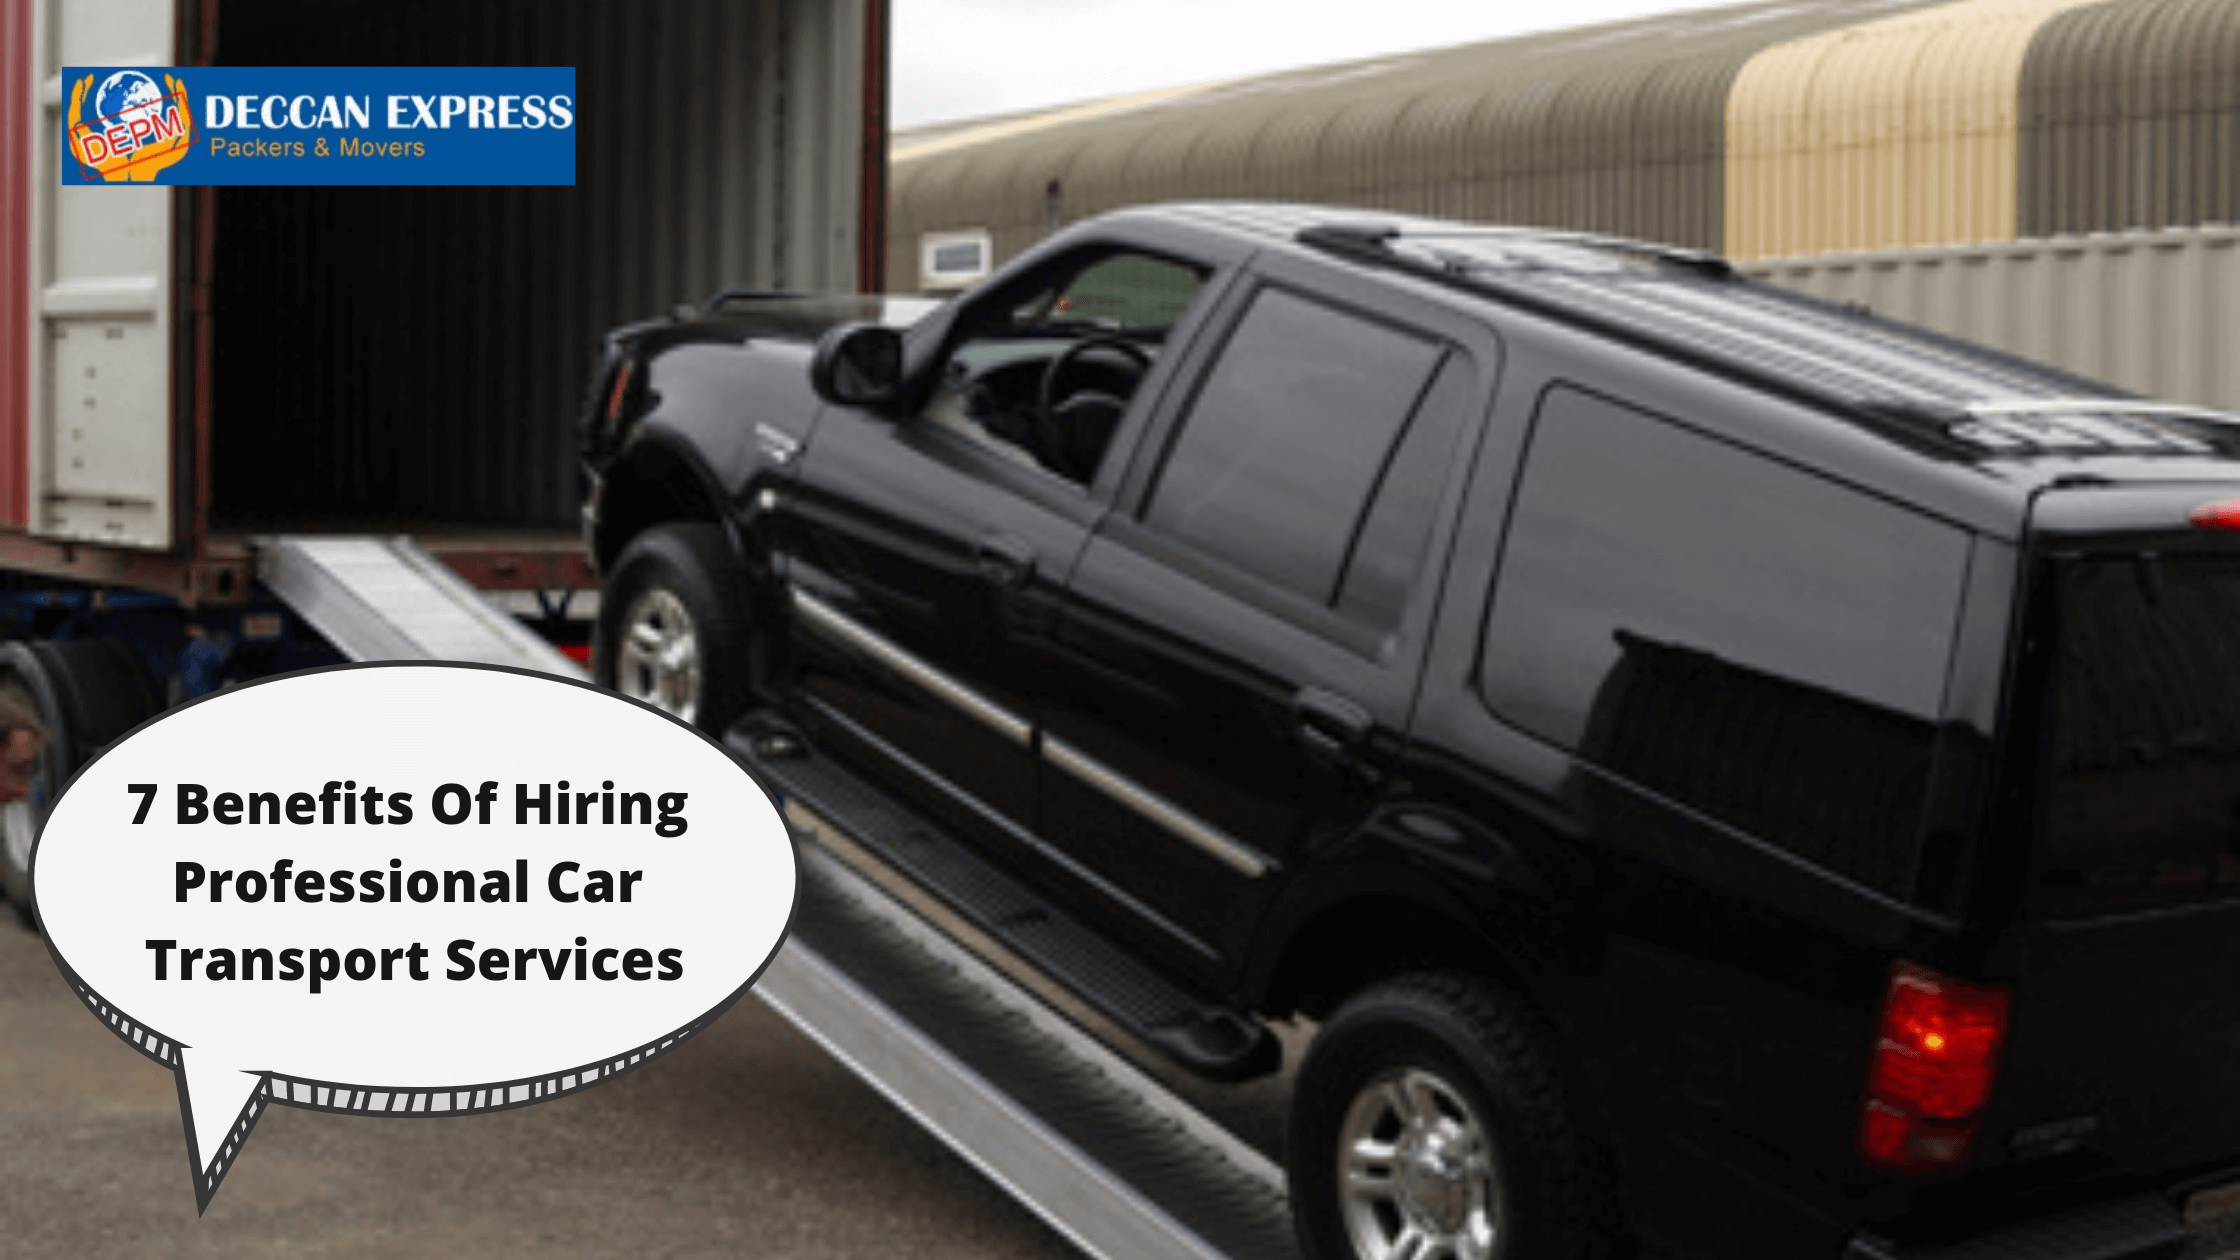 7 Benefits Of Hiring Professional Car Transport Services